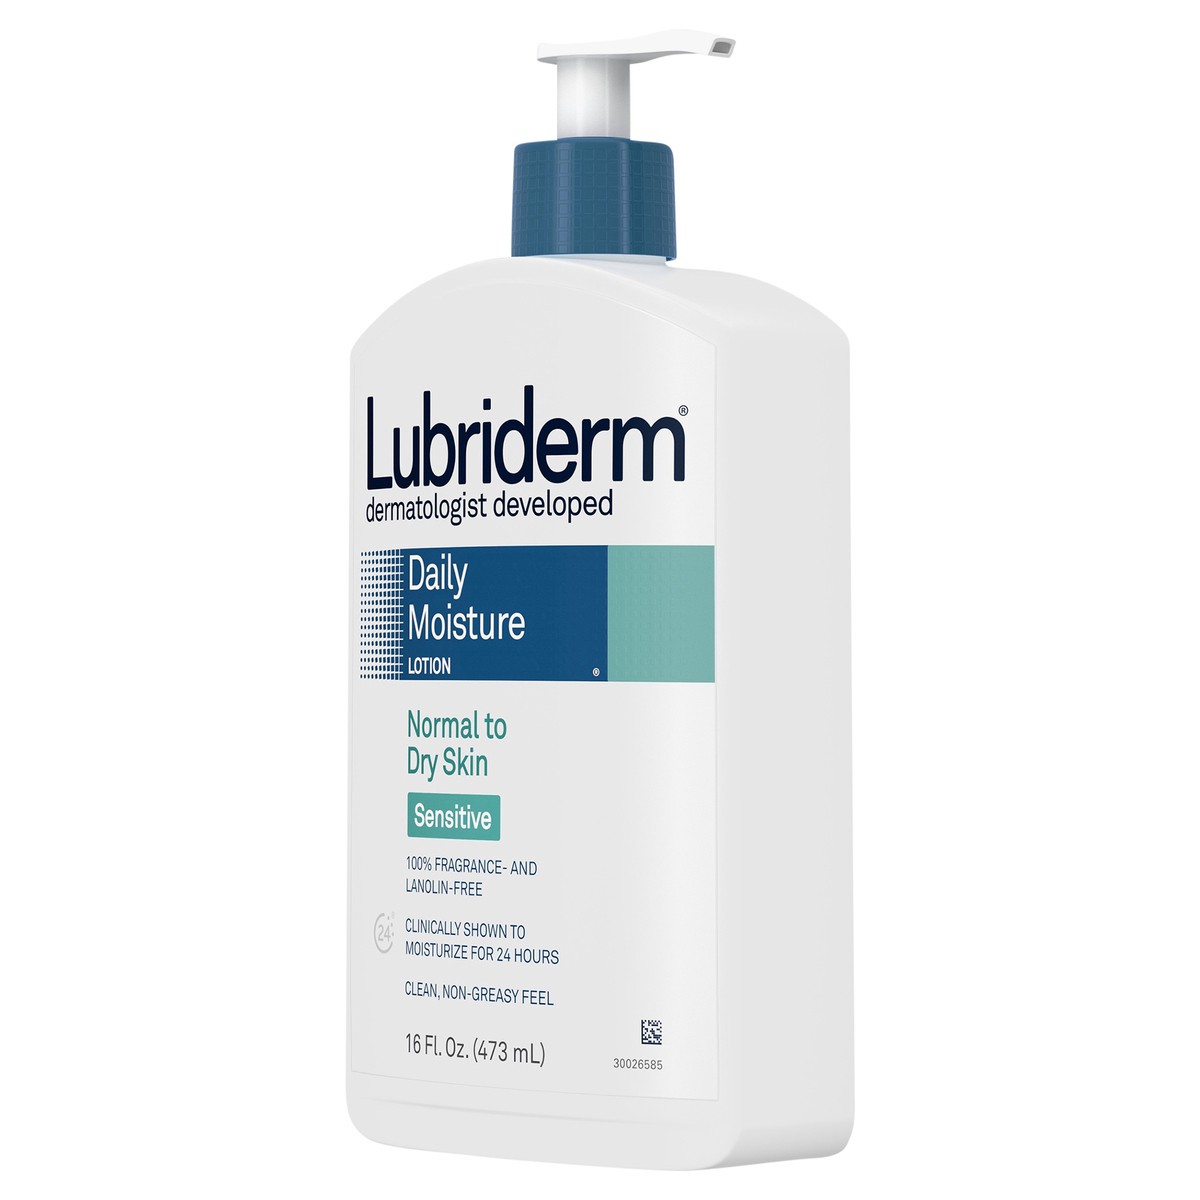 slide 3 of 7, Lubriderm Daily Moisture Hydrating Body Lotion for Sensitive, Dry Skin, Enriched with Pro-Vitamin B5, Dye- and Lanolin-Free, Unscented and Non-Greasy For Sensitive Skin Comfort, 16 fl. oz, 16 fl oz